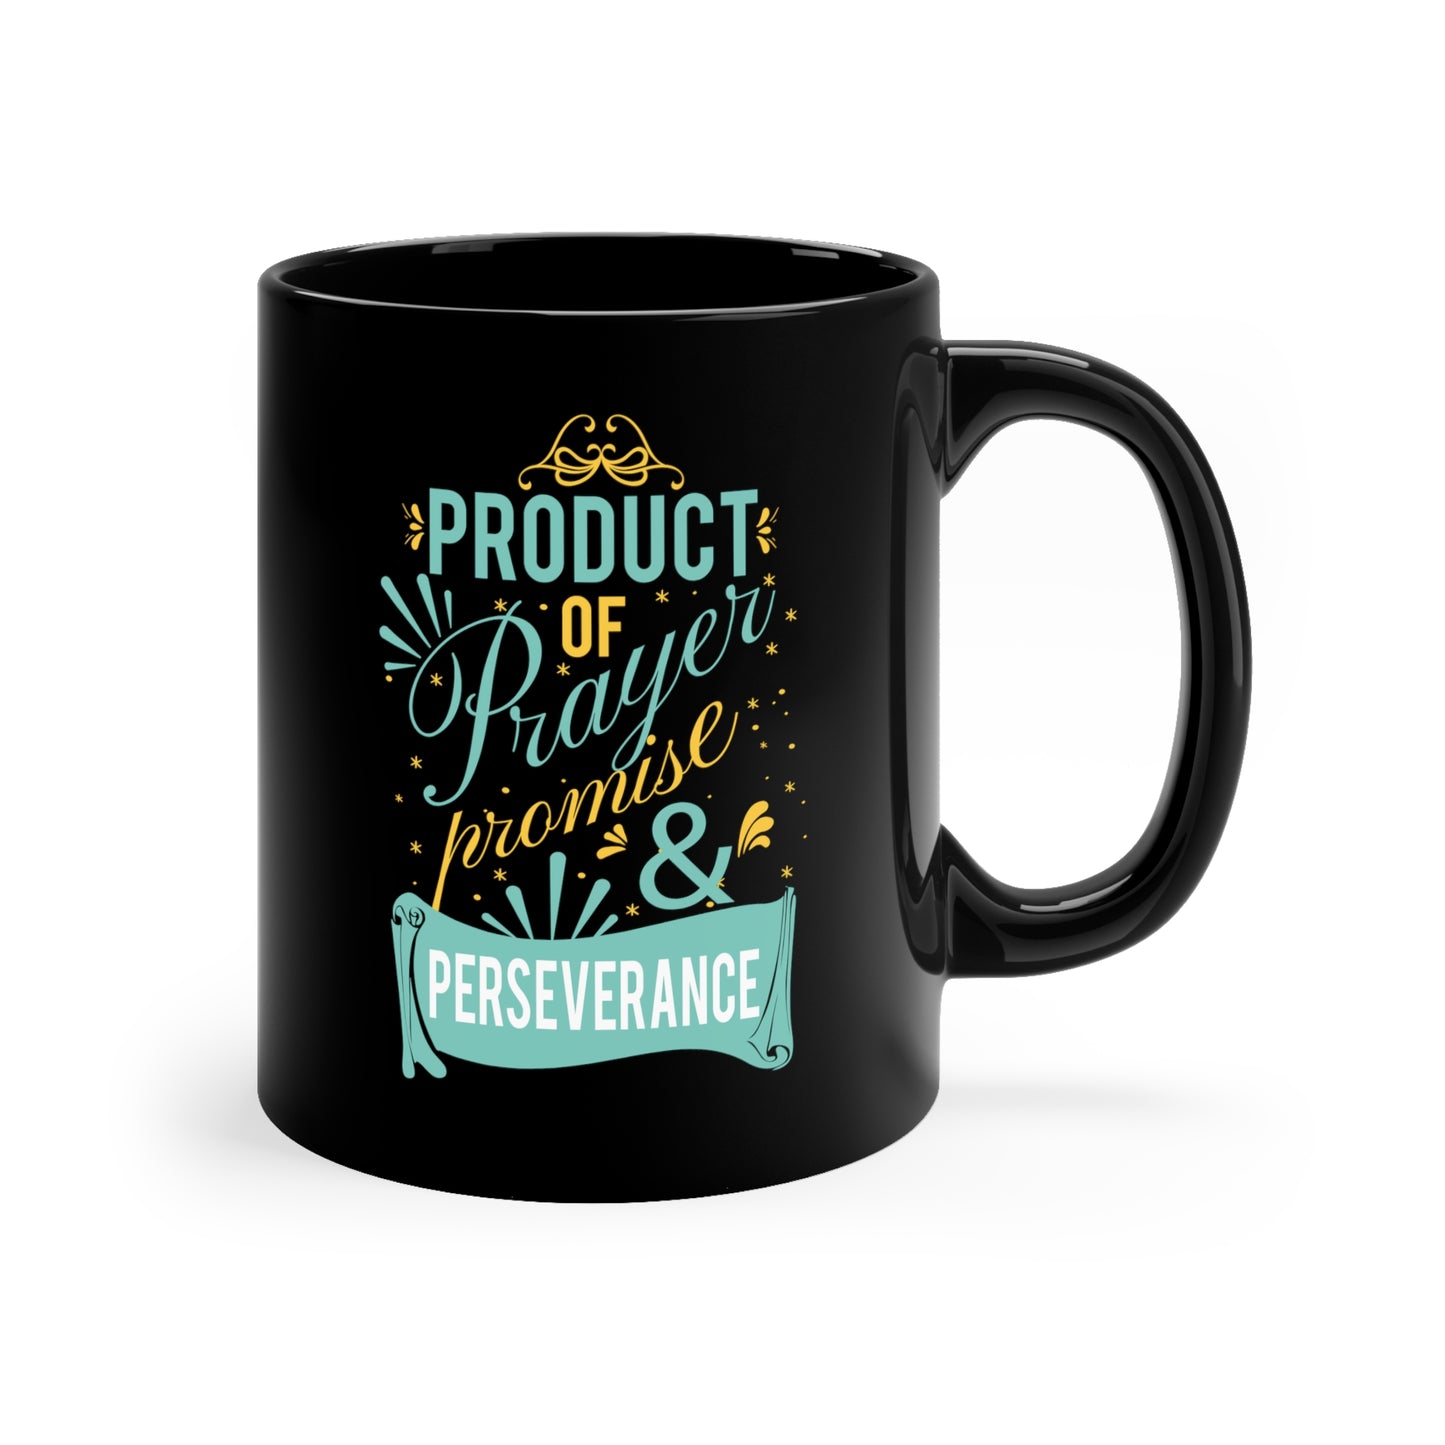 Product of Prayer, Promise, And Perseverance Christian Black Ceramic Mug 11oz (double sided print)